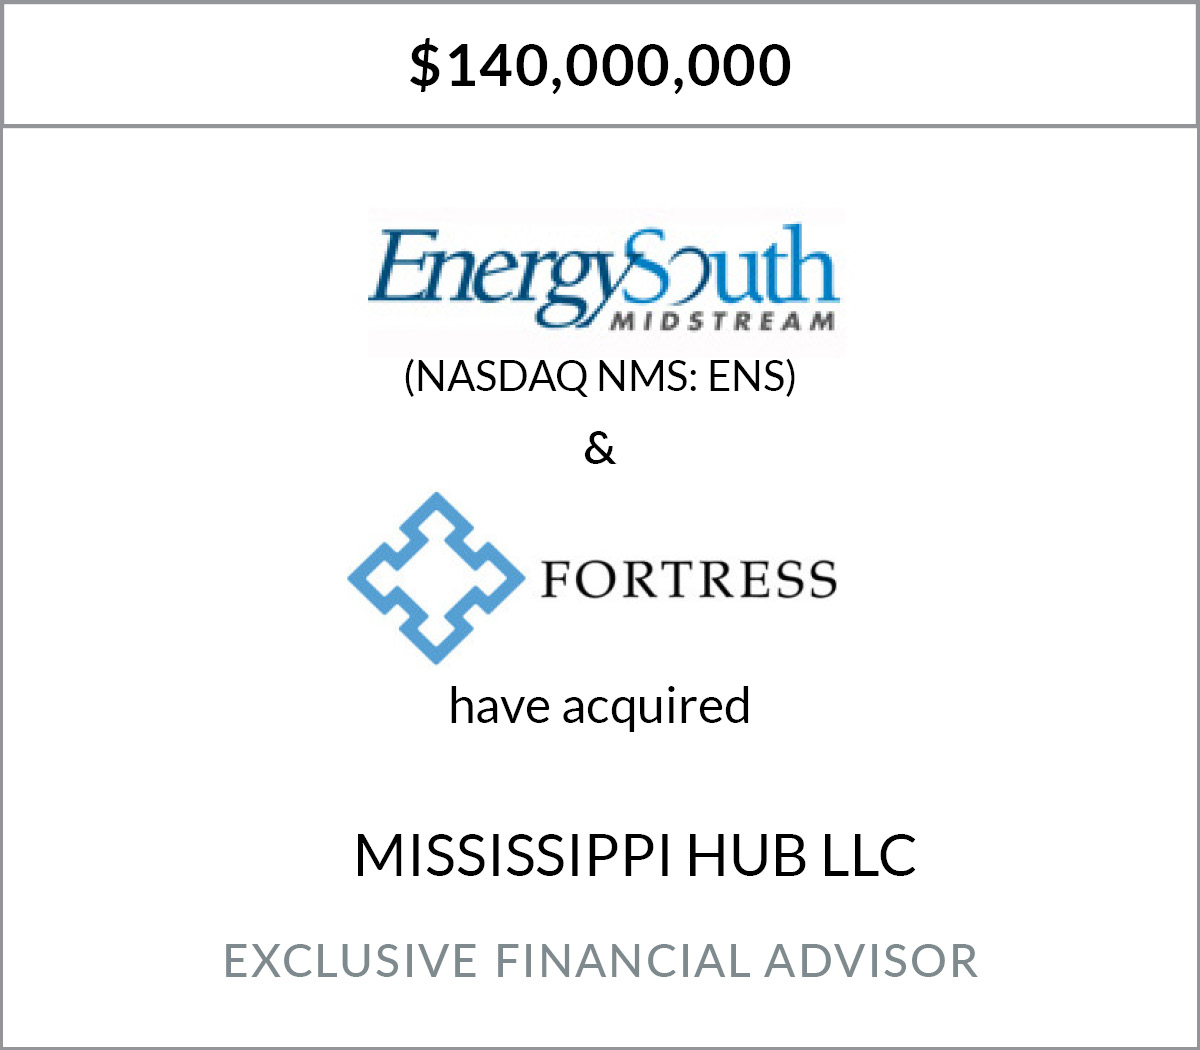 Energy South, Inc. has acquired Mississippi Hub LLC